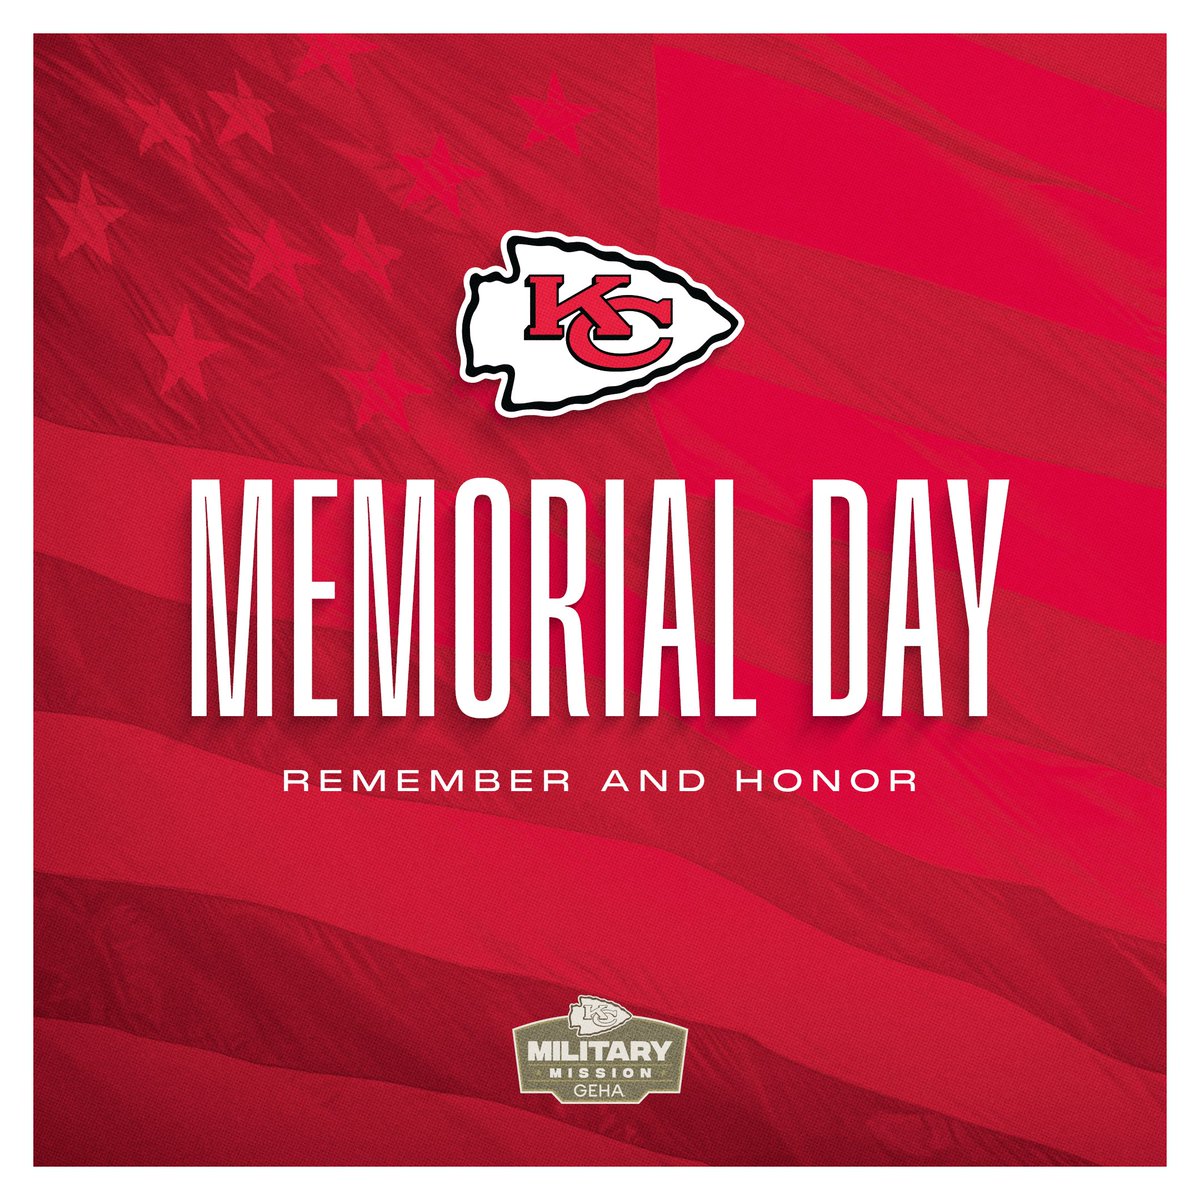 Today, we honor and remember the heroic men and women who sacrificed everything for our country.